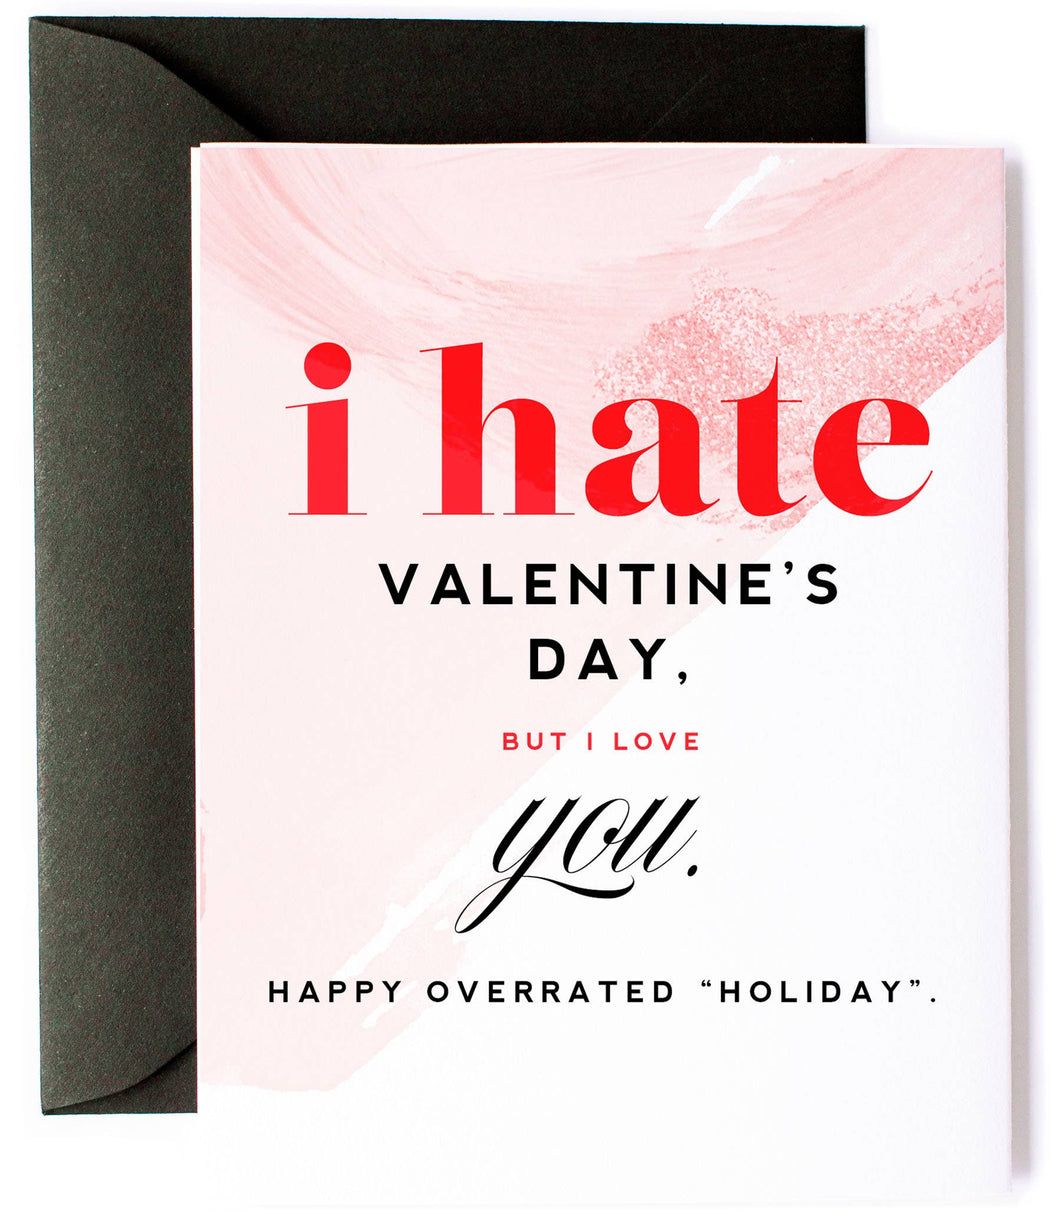 Hate Valentines Day But Love You- Funny Valentine's Day Card